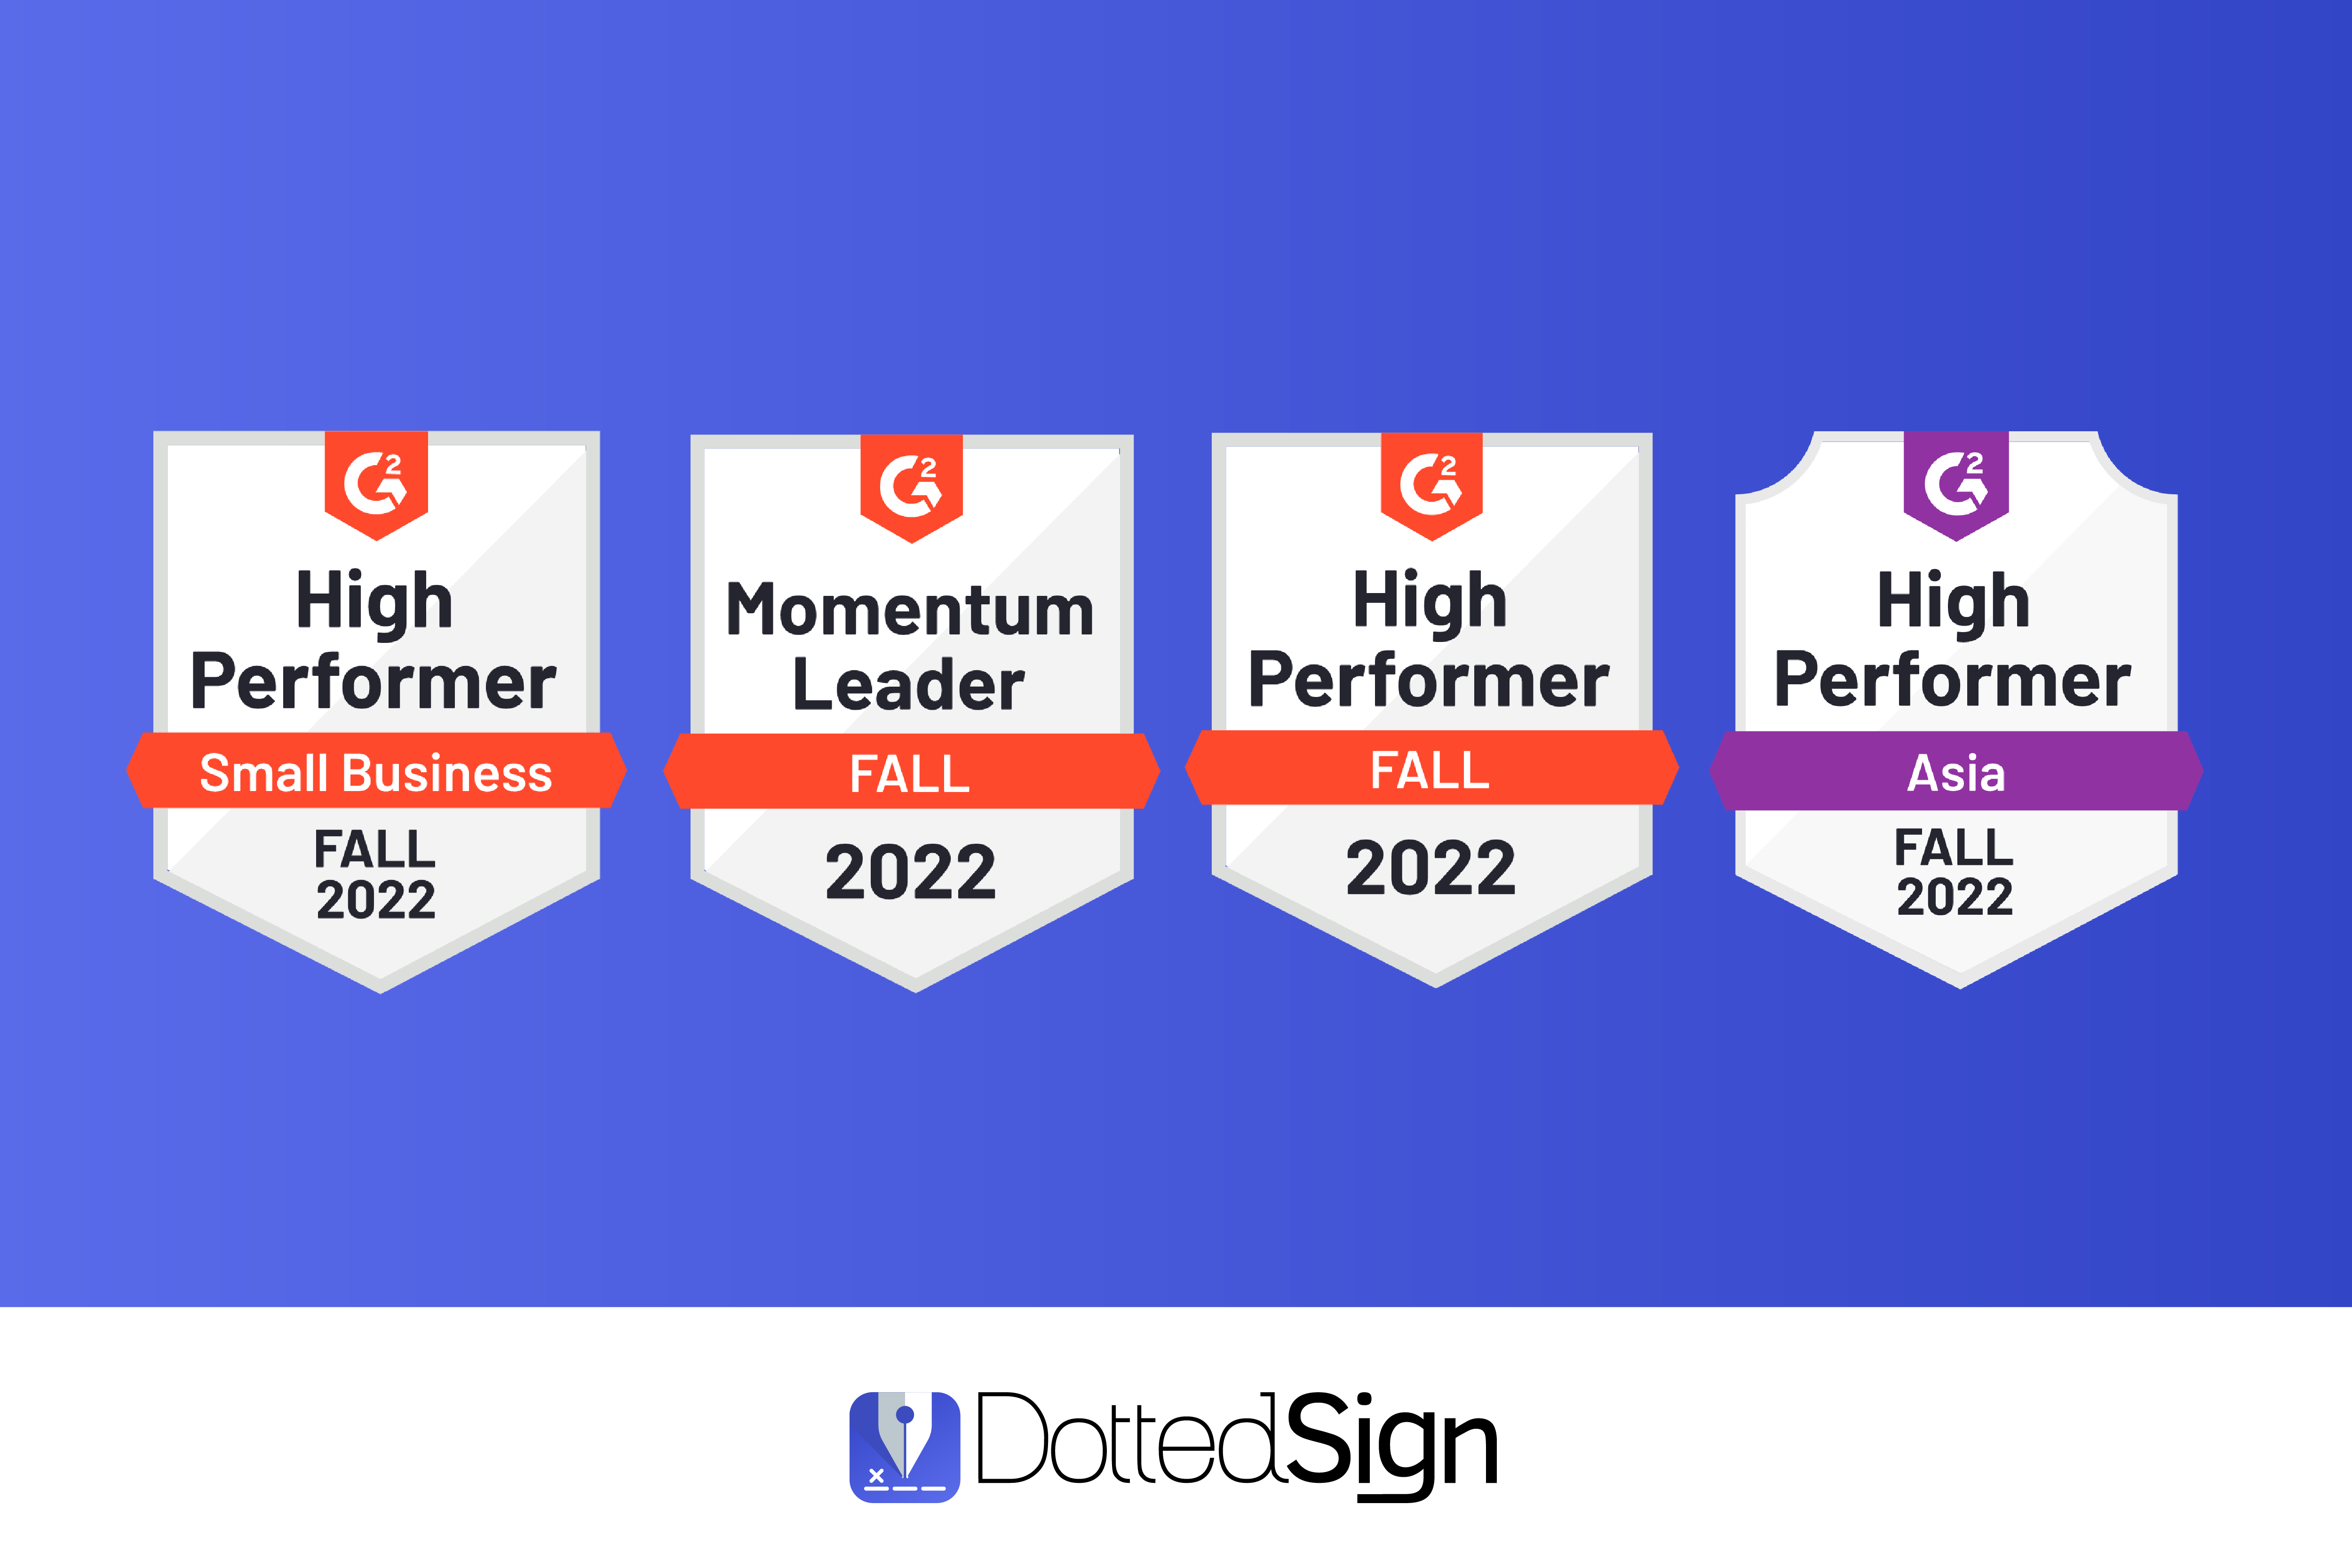 DottedSign Earns Top Ranks as the “High Performer” in G2’s 2022 Fall Report for Small Businesses